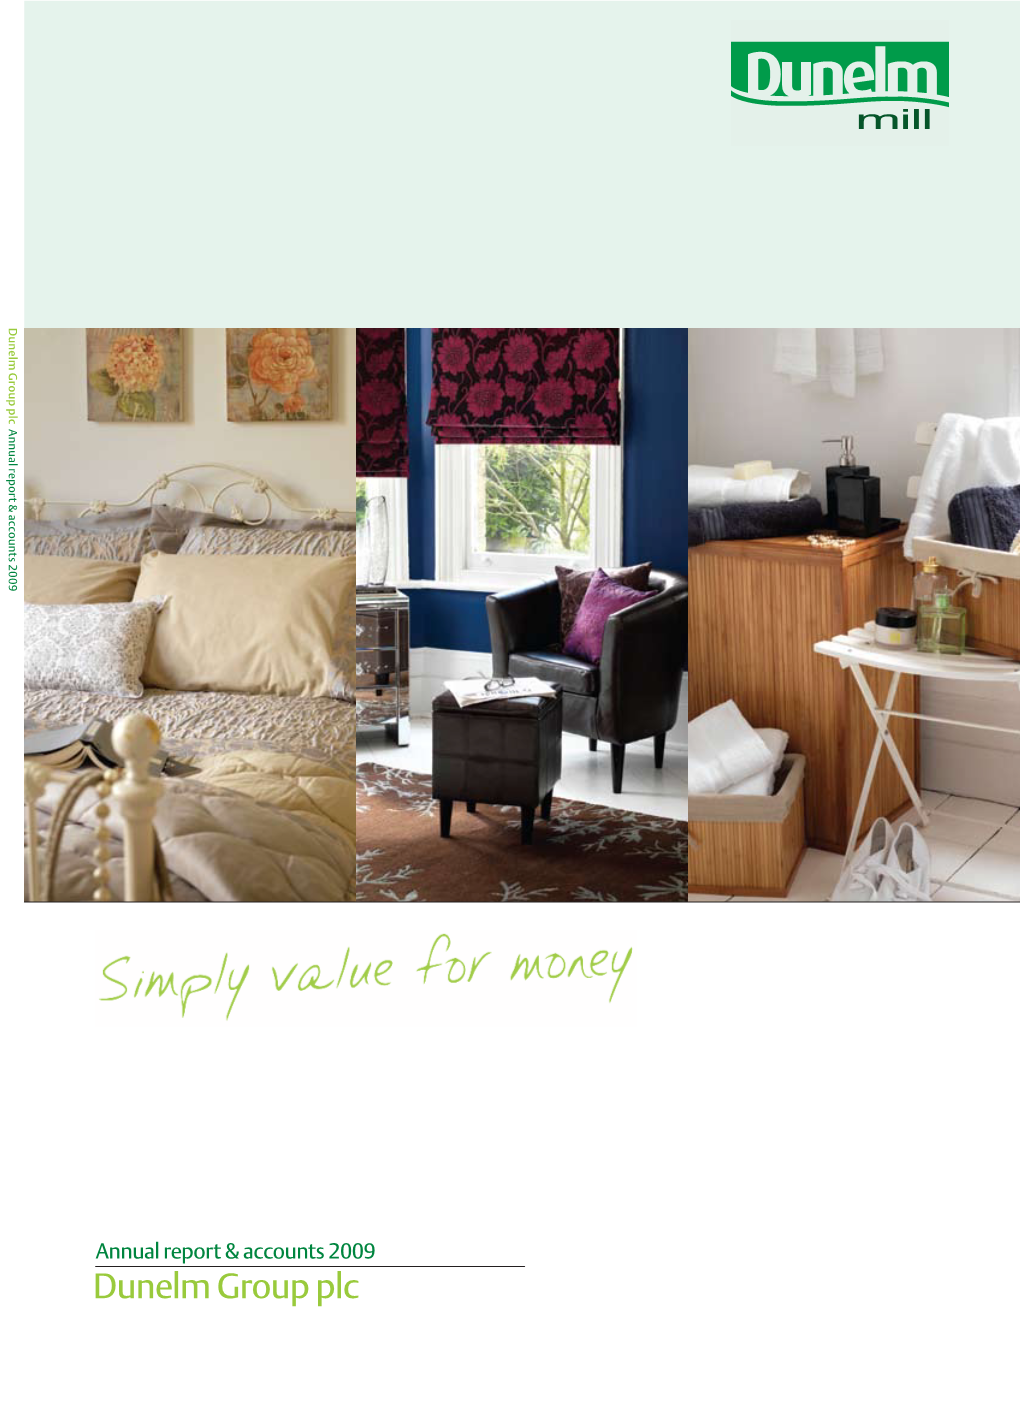 Dunelm Group Plc Fosse Way Syston LE7 1NF Tel: 0116 264 4356